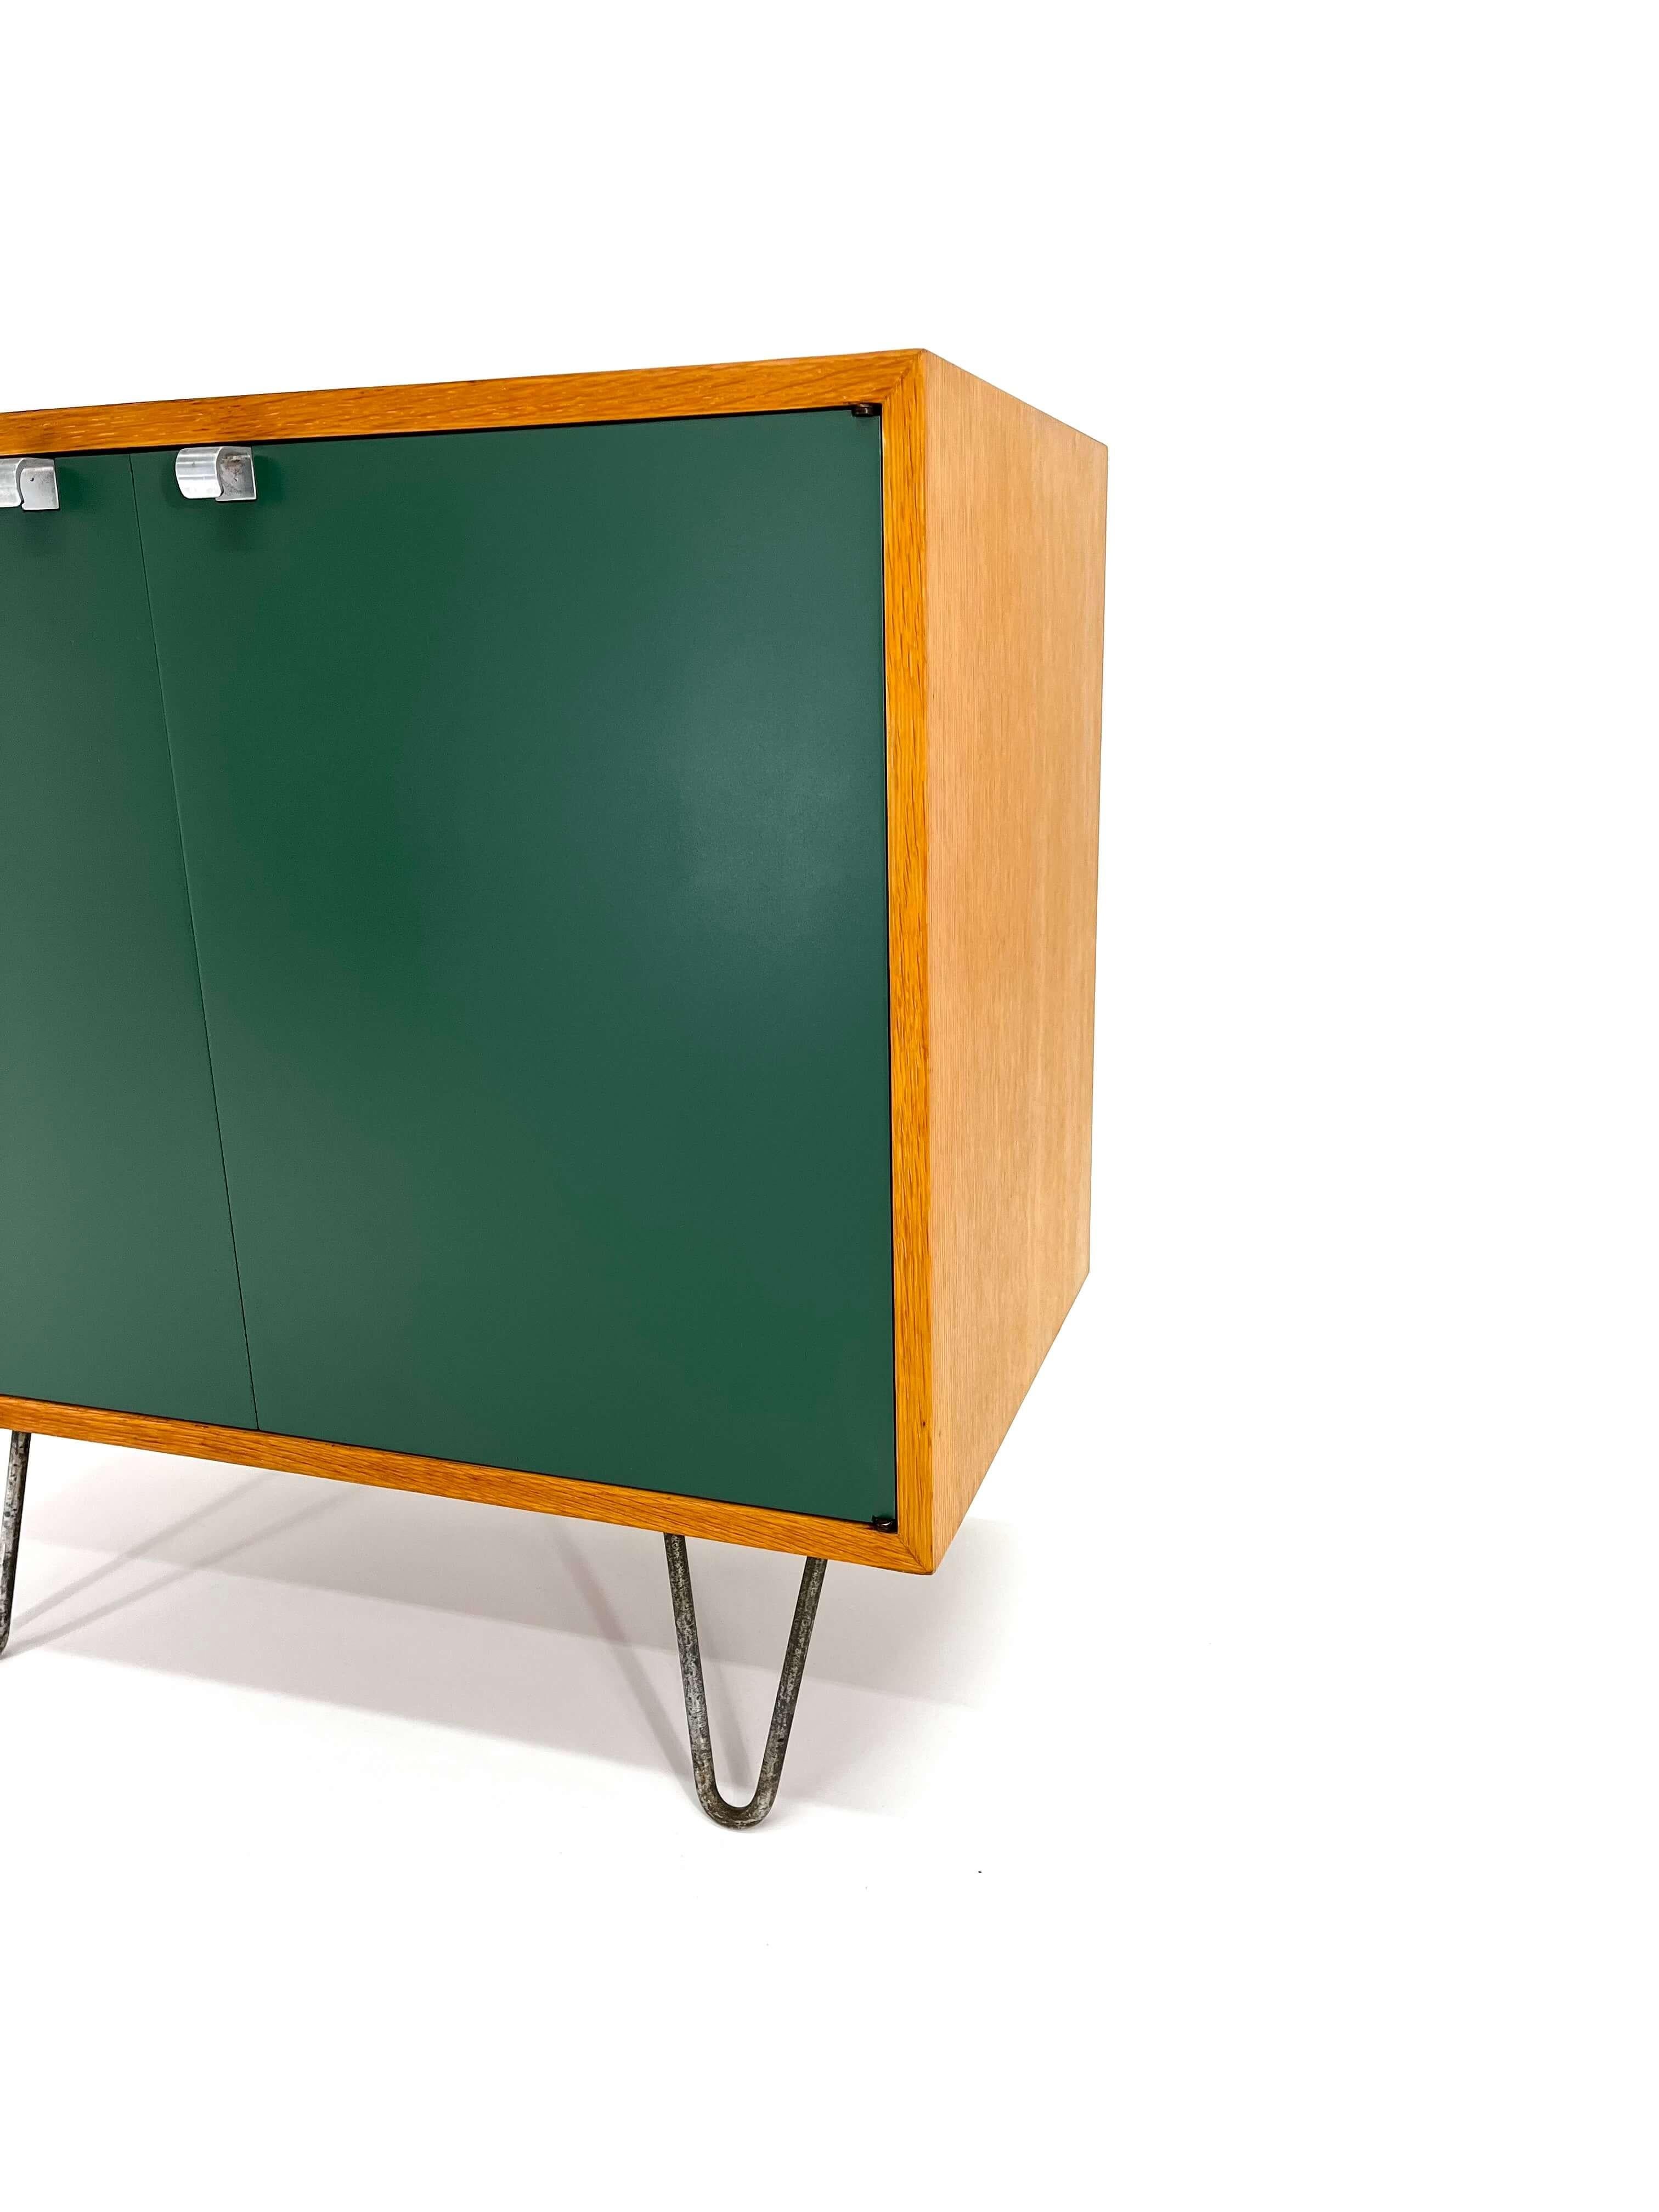 George Nelson for Herman Miller Cabinet - Green Lacquered doors & Hair Pin Legs 3